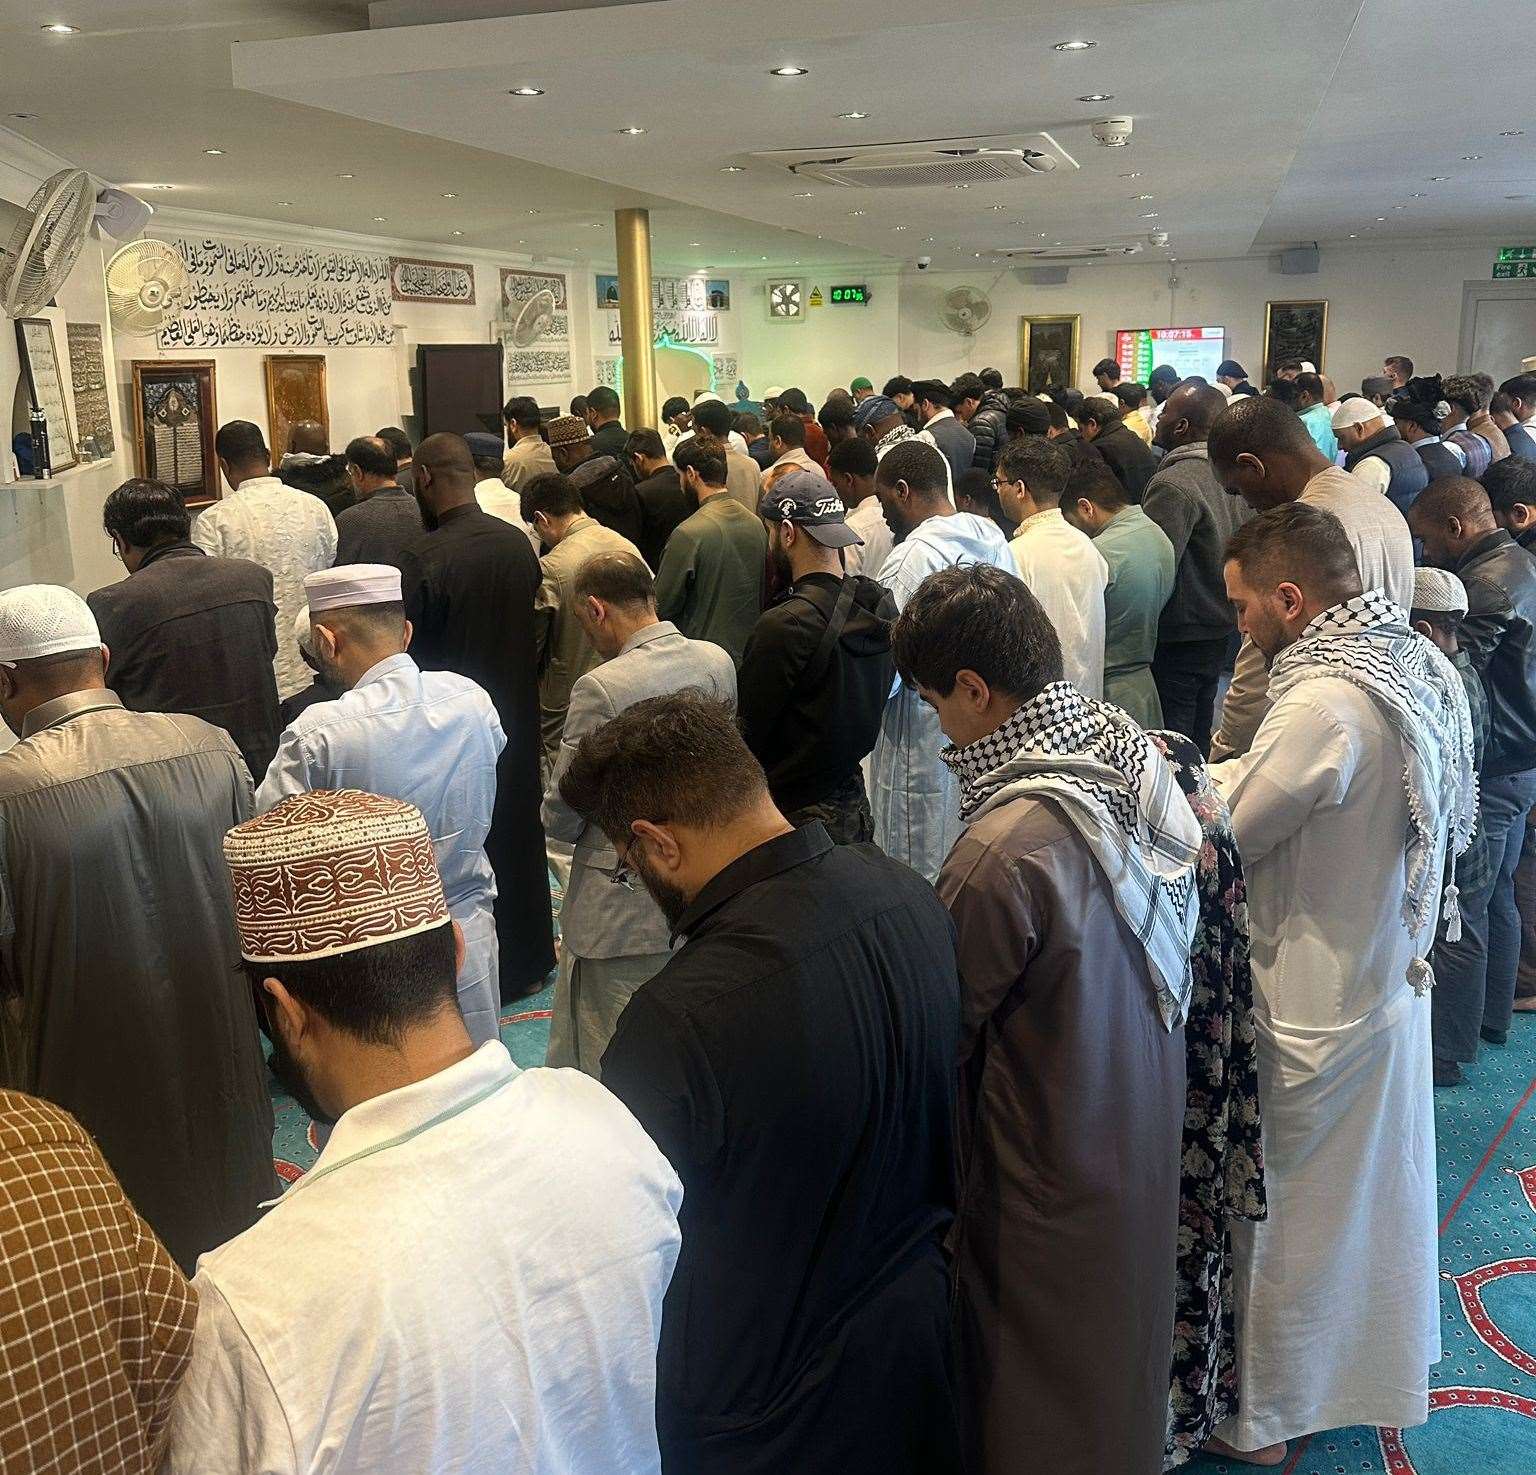 Prayers were held at the Gravesend Central Mosque this morning